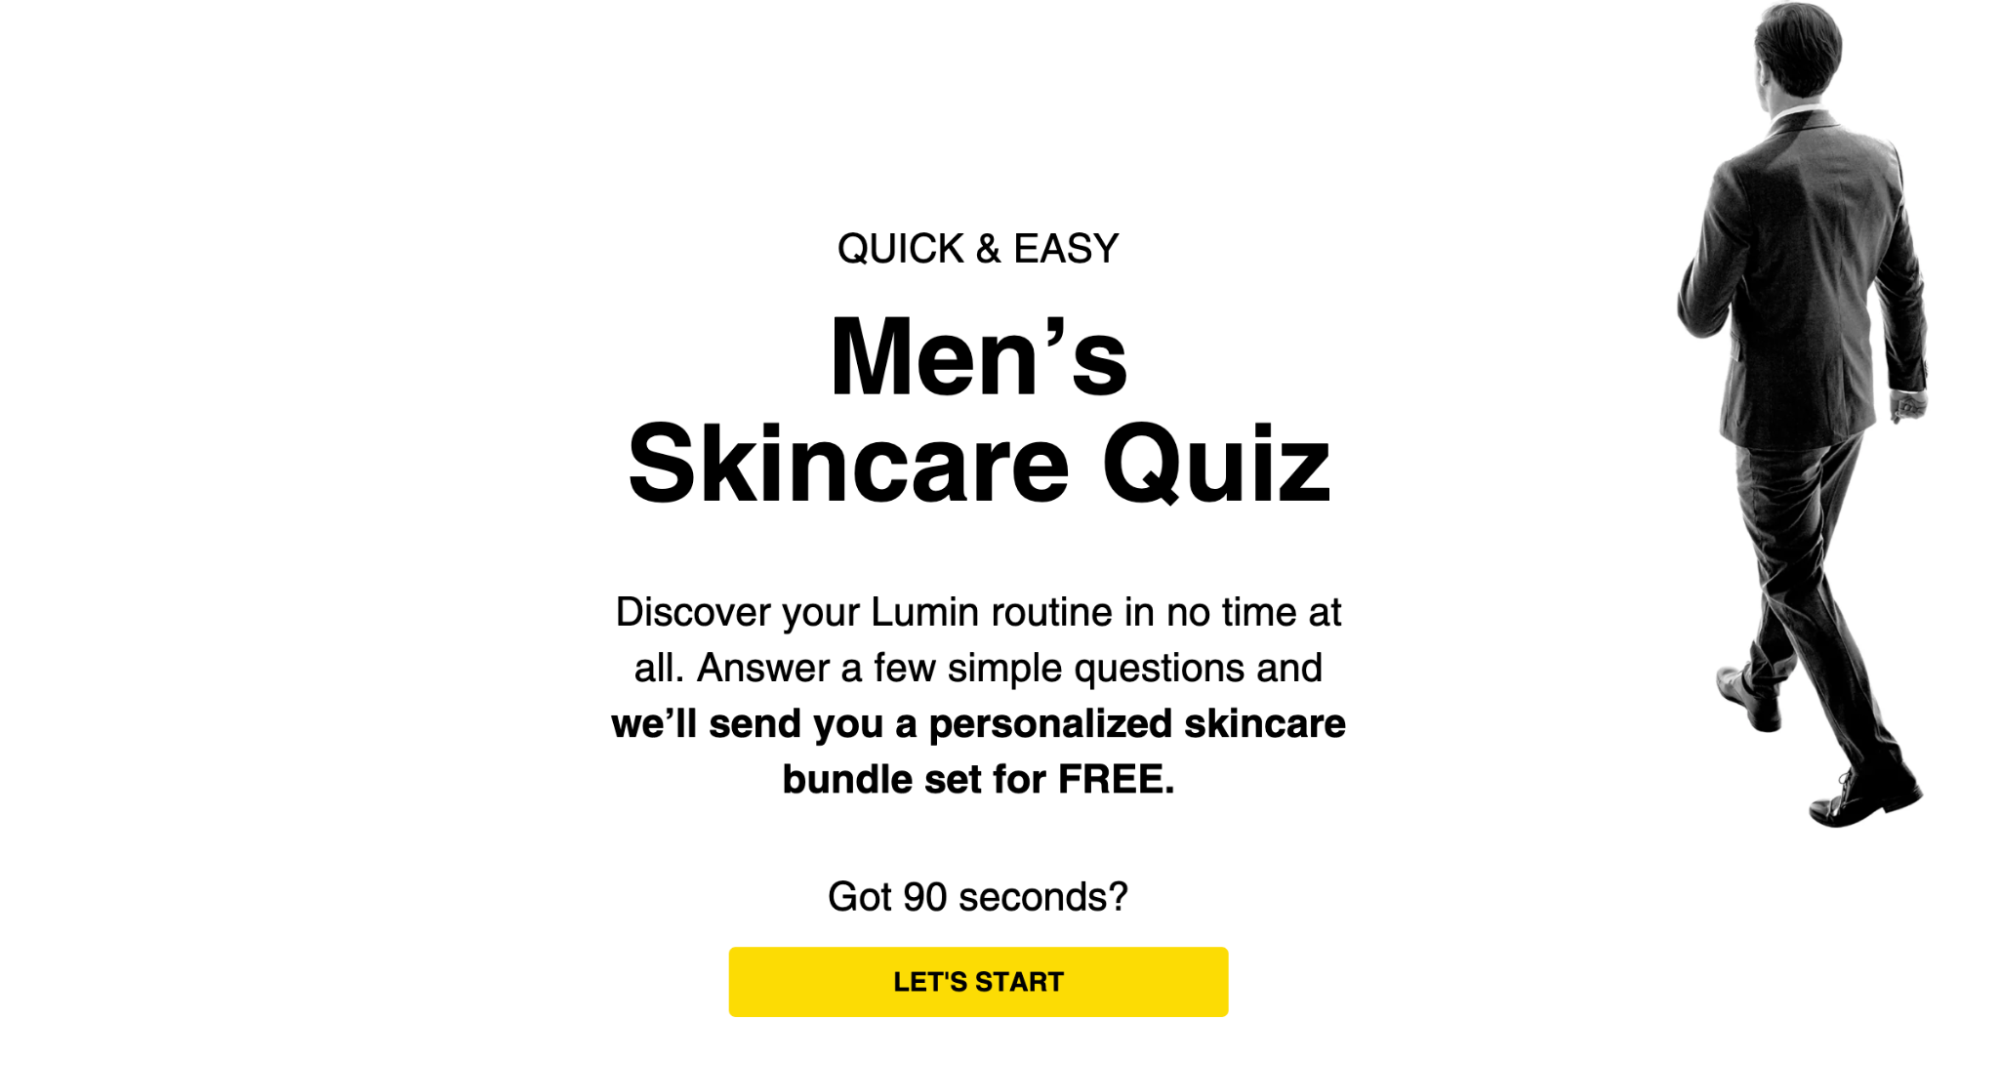 Image of Lumin’s landing page for men’s skincare quiz